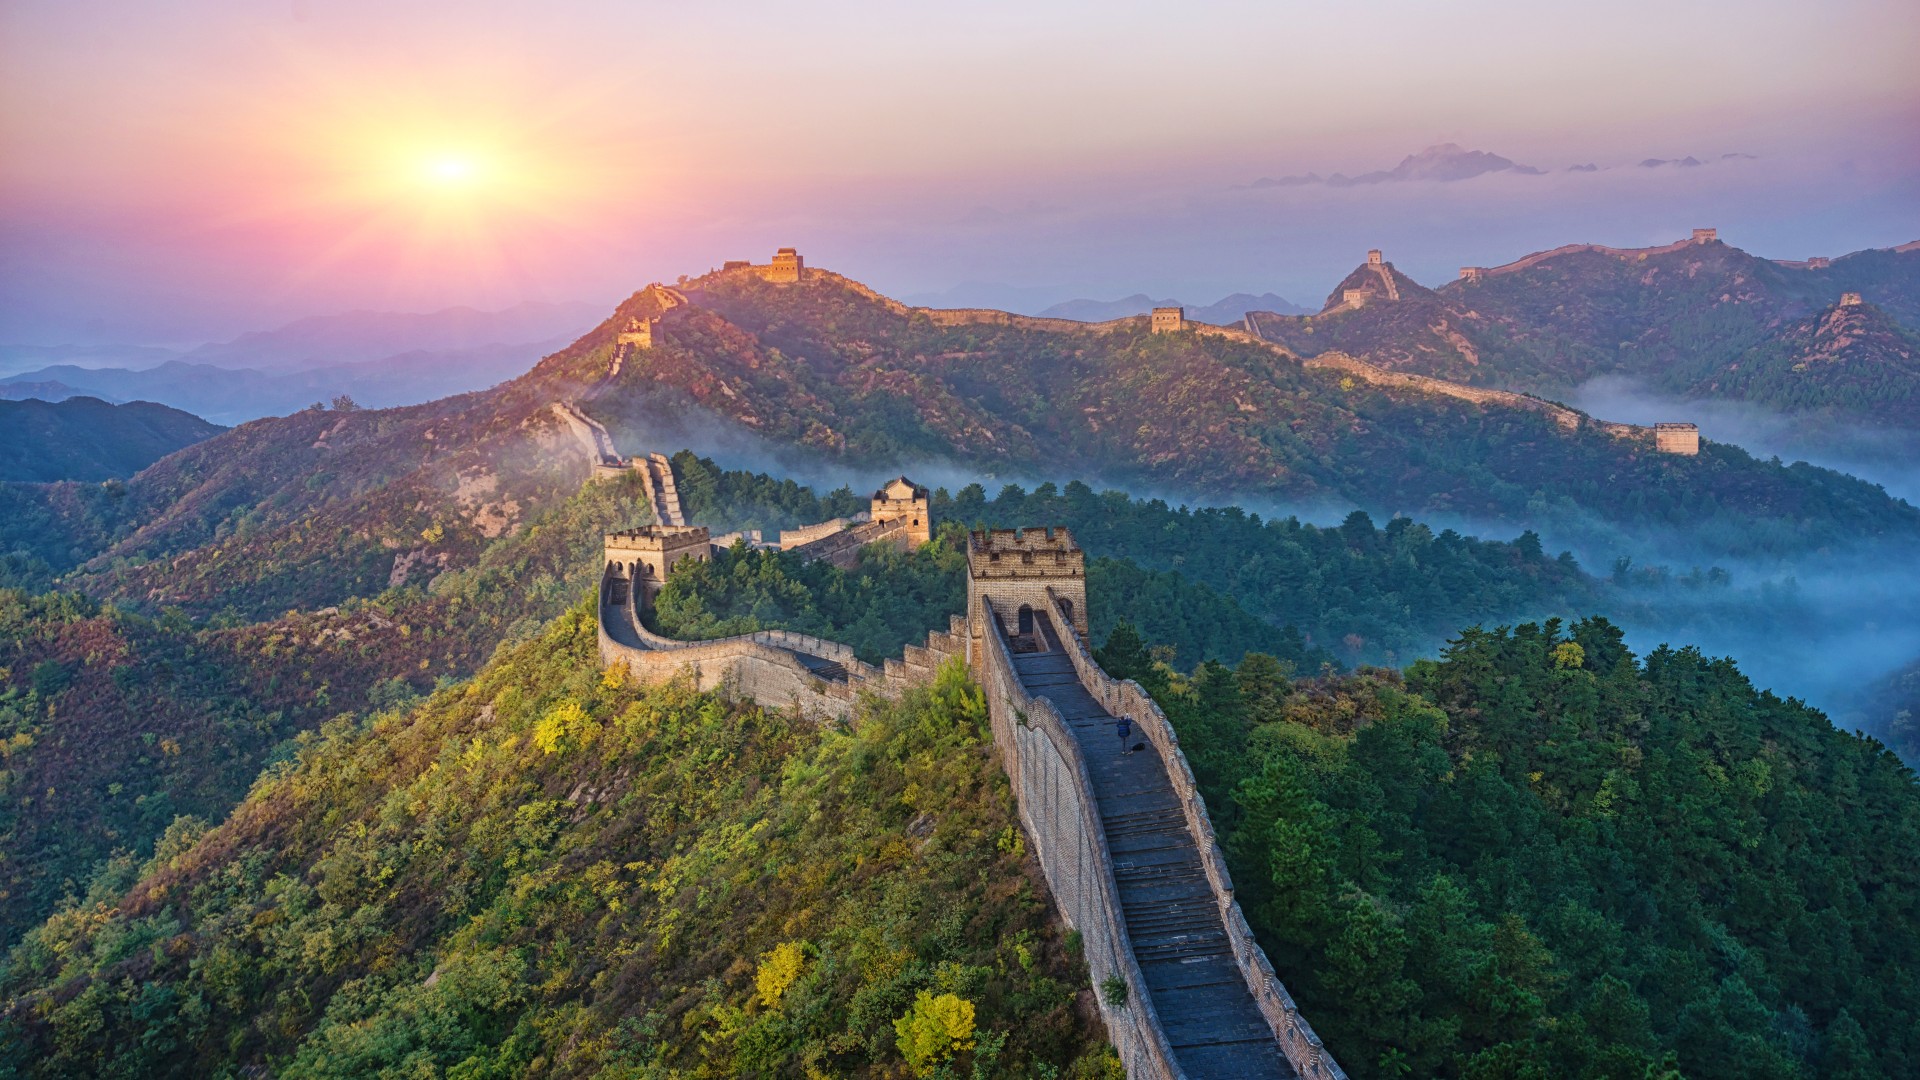 General 1920x1080 nature landscape Great Wall of China China wall bricks tower trees forest mist aerial view sunset mountains sunset glow